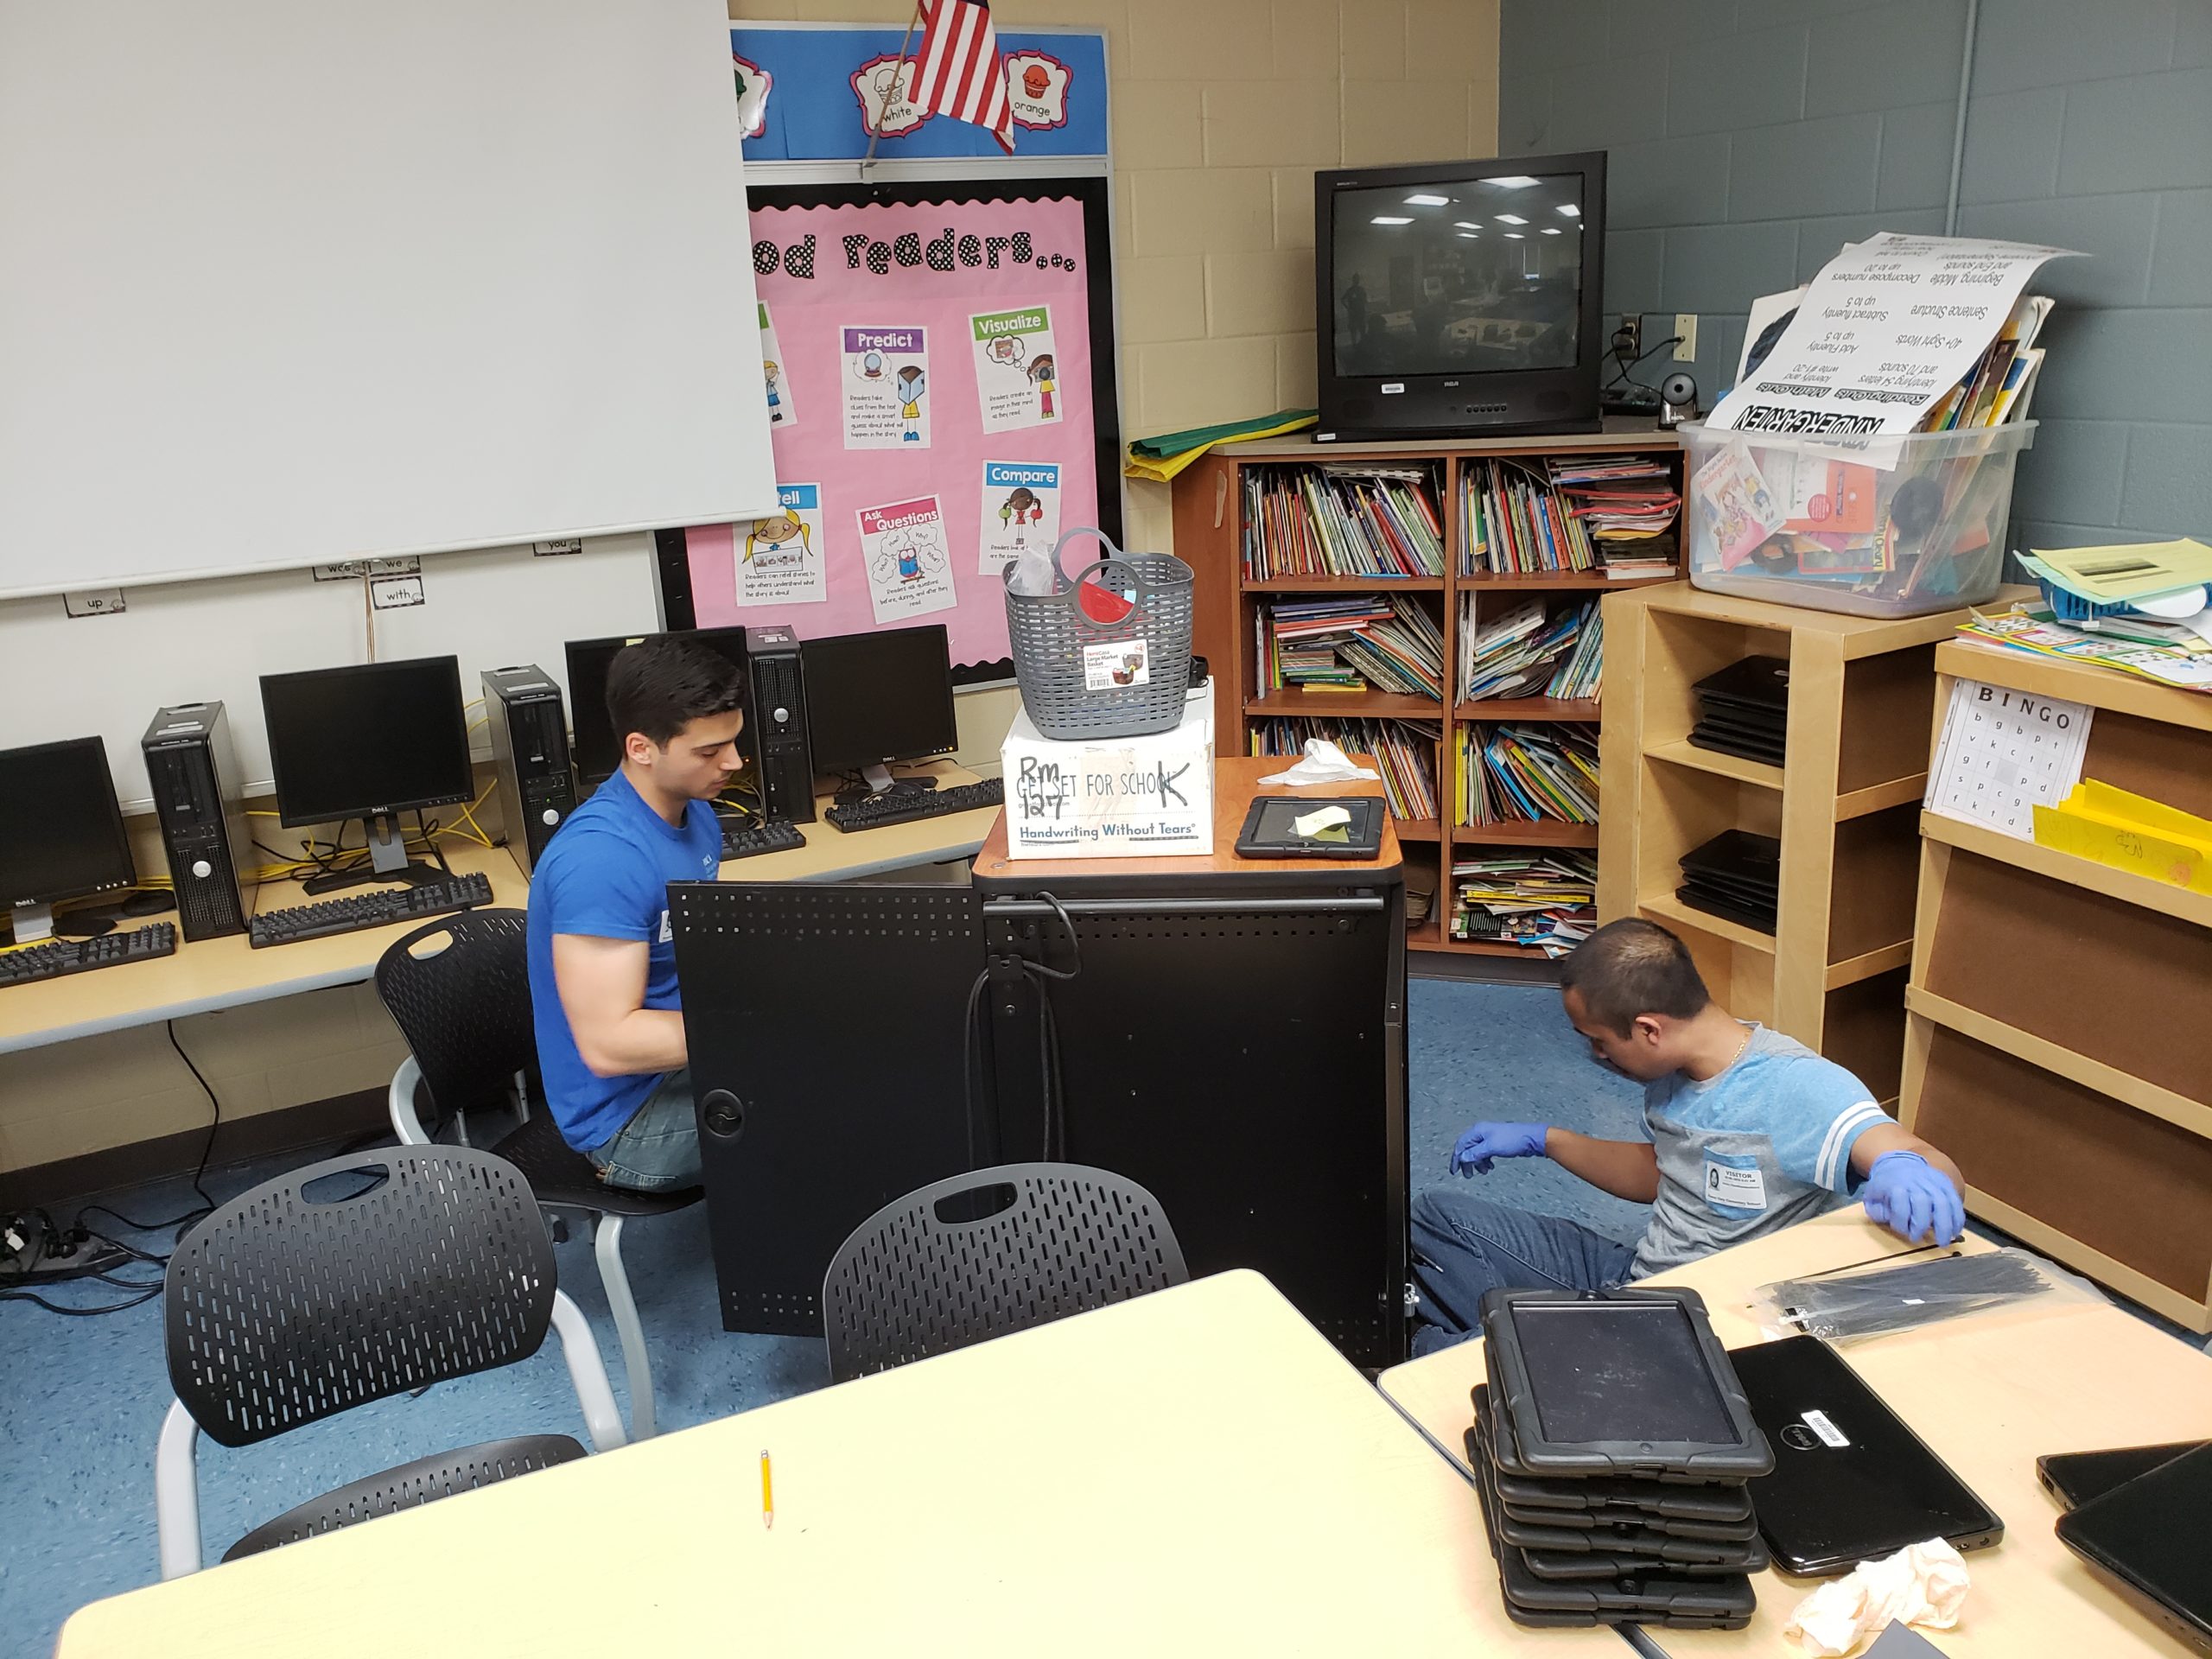 Two male volunteers working with TVs, computers and tablets